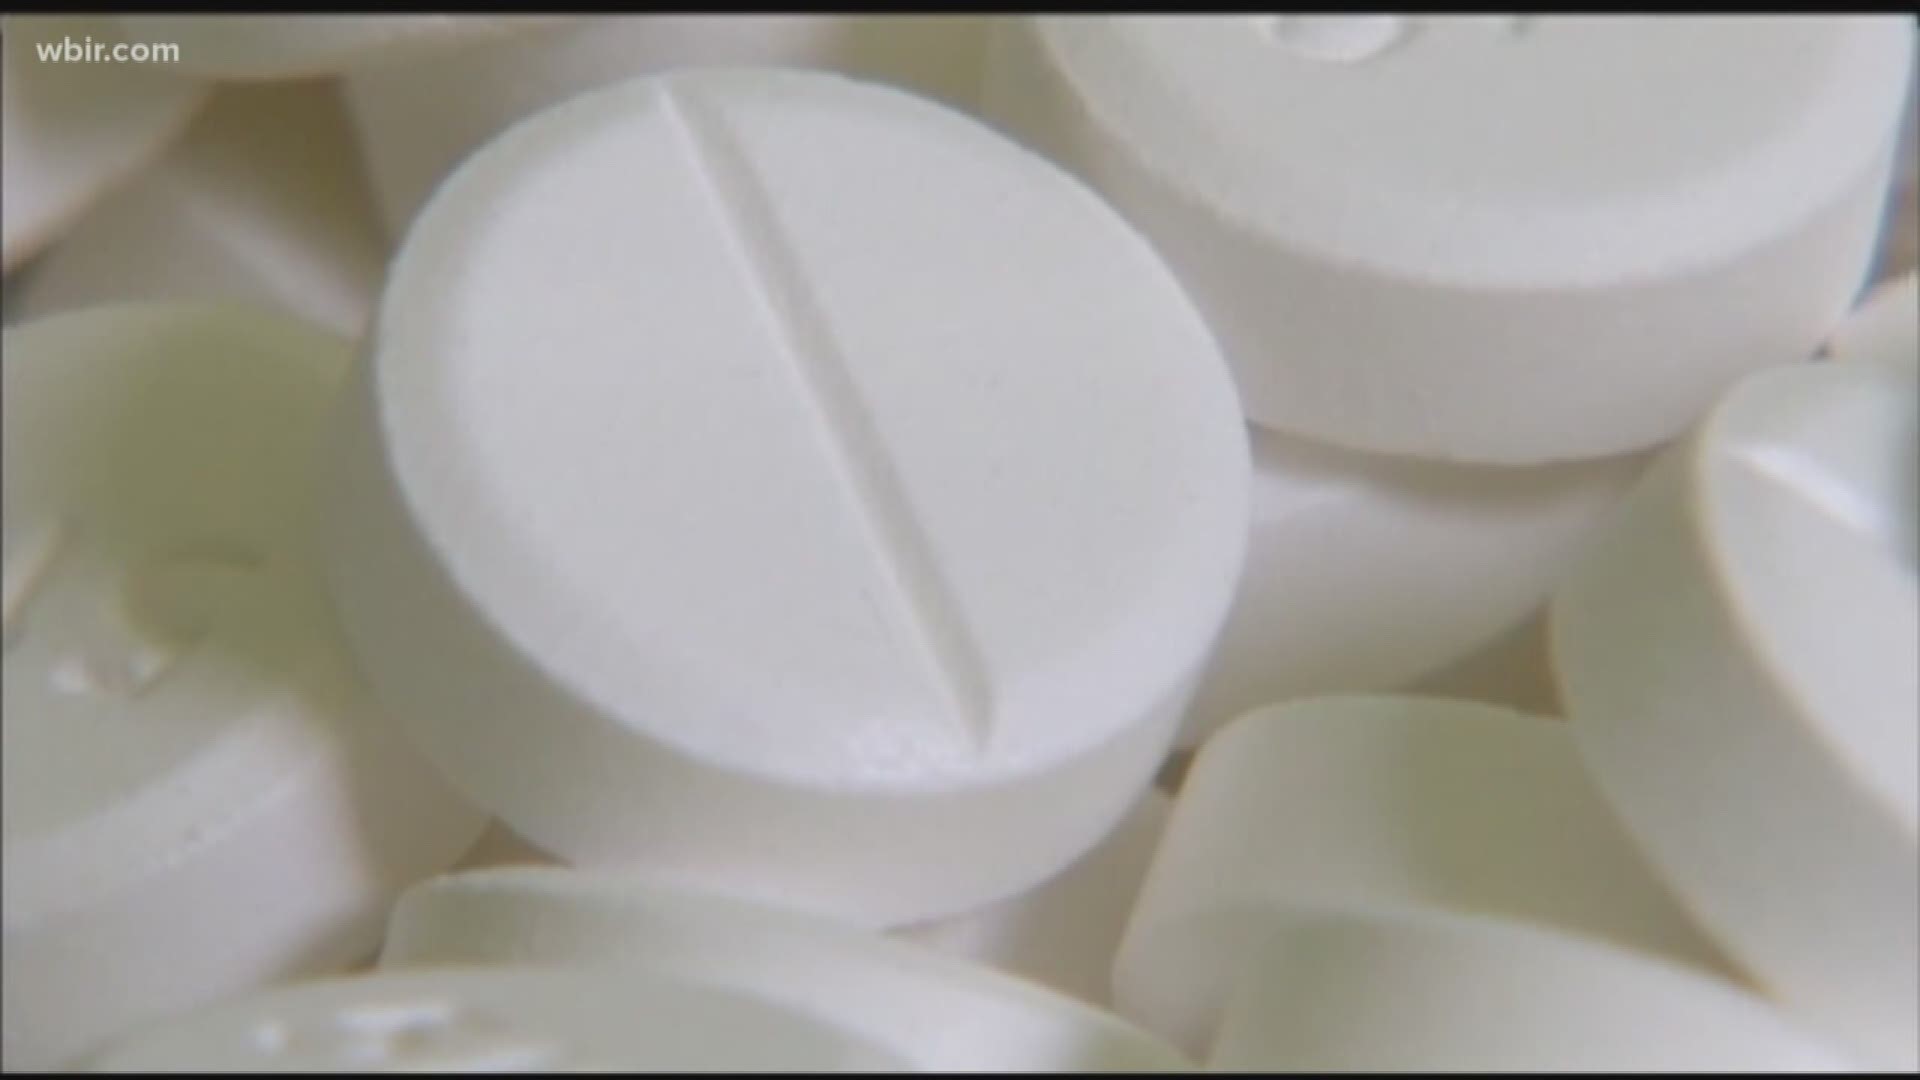 A study from the Brookings Institute shows East Tennessee has one of the highest prescription rates in the country. Employers say it's becoming increasingly more difficult to recruit reliable, drug free workers